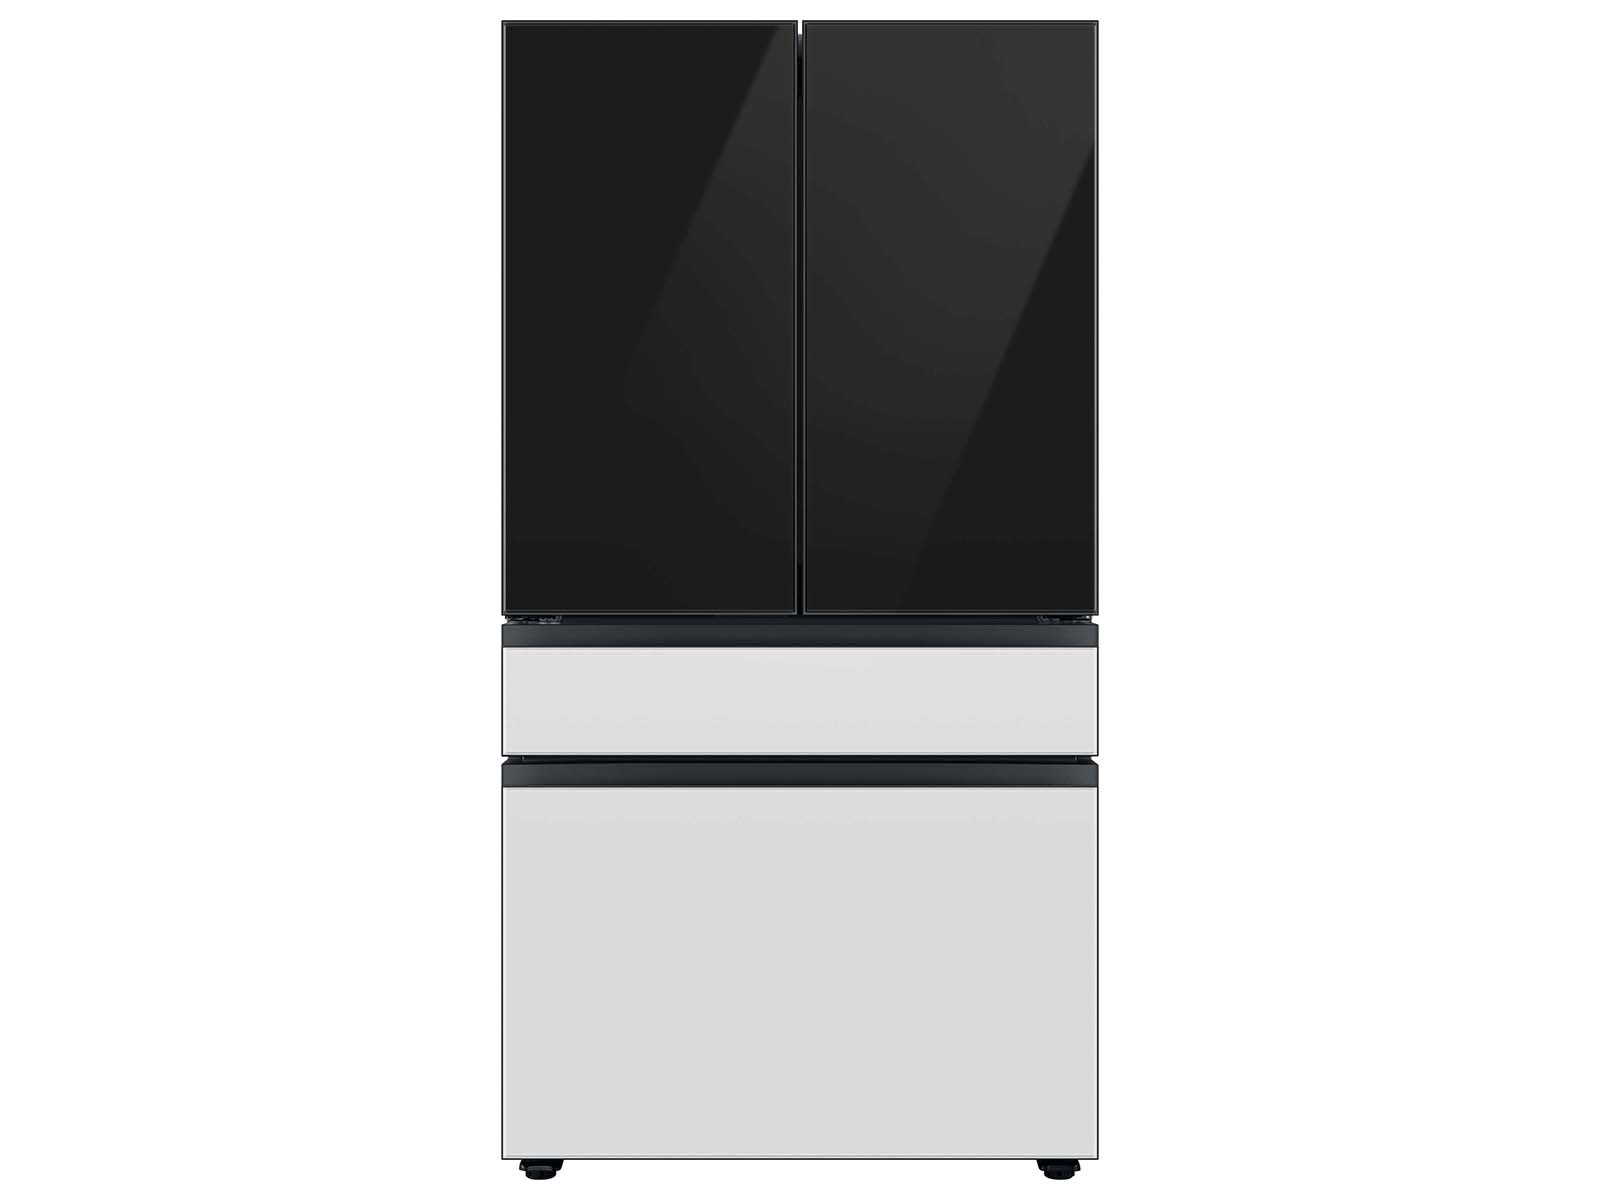 Bespoke 4-Door French Door Refrigerator (23 cu. ft.) with Customizable Door Panel Colors and Beverage Center™ in Charcoal Glass Top Panels with White Glass Middle and Bottom Panel